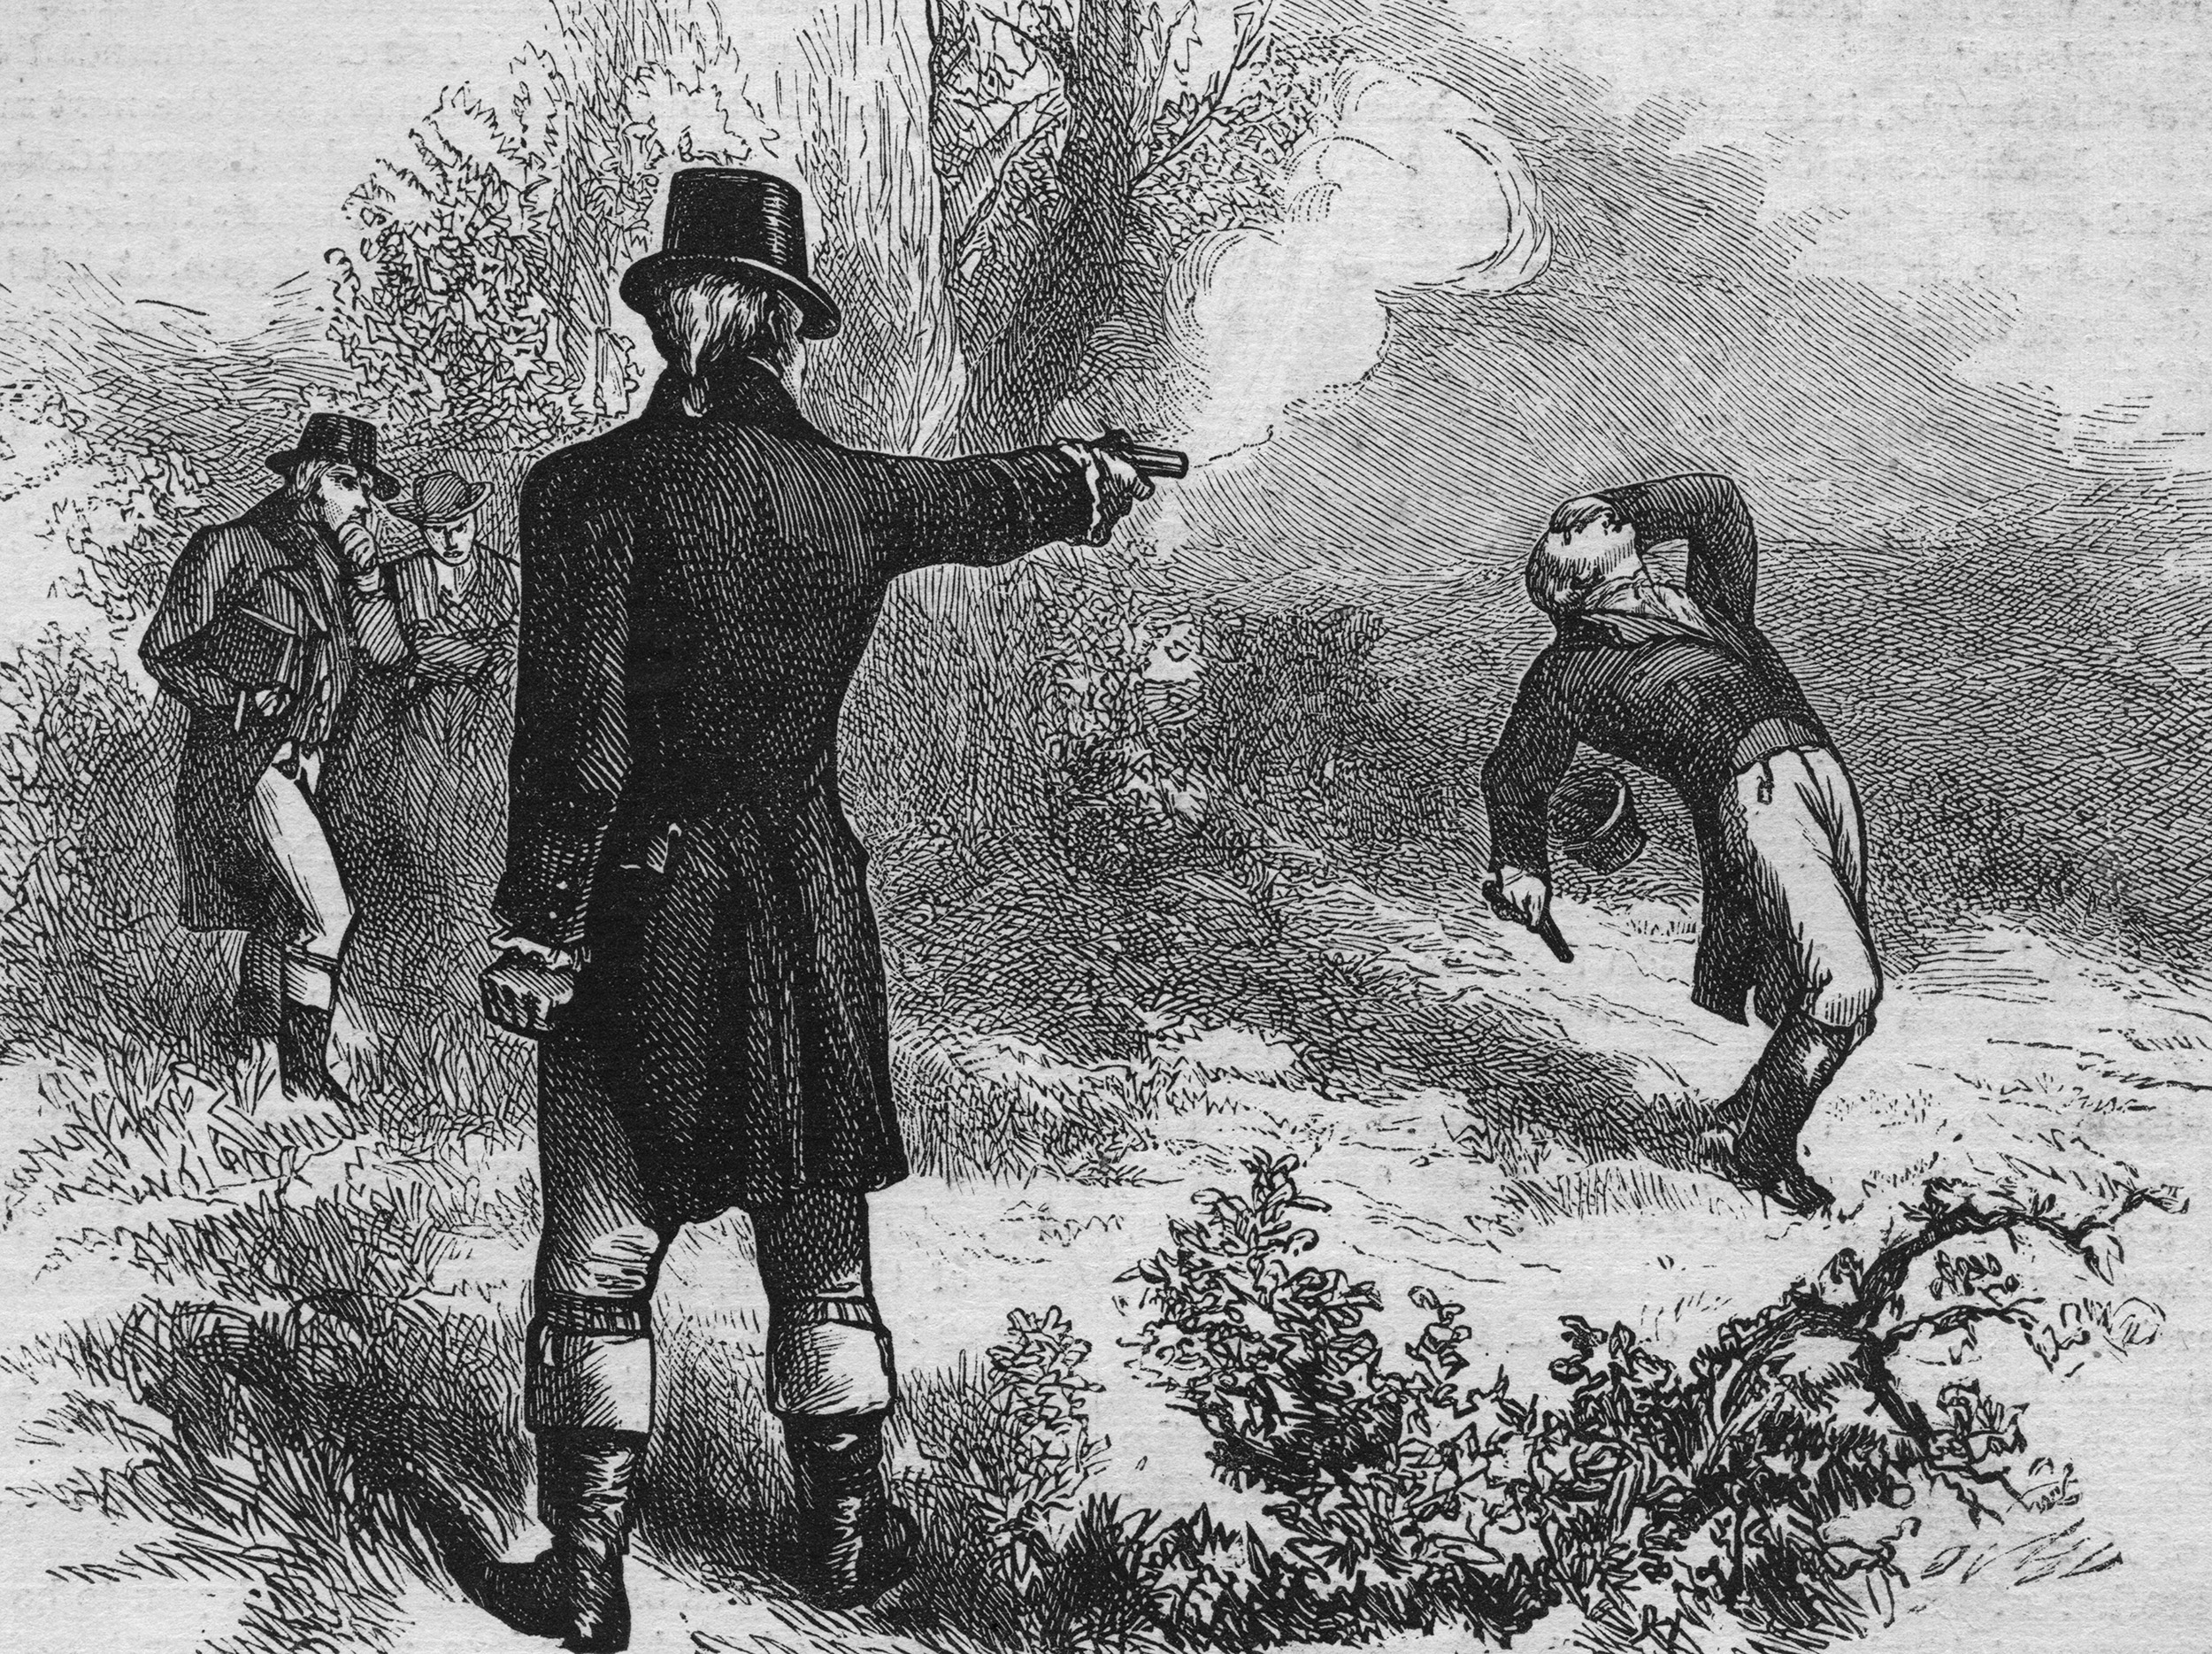 An engraved illustration of The Burr/Hamilton duel on July 11, 1804. (Kean Collection/Getty Images)